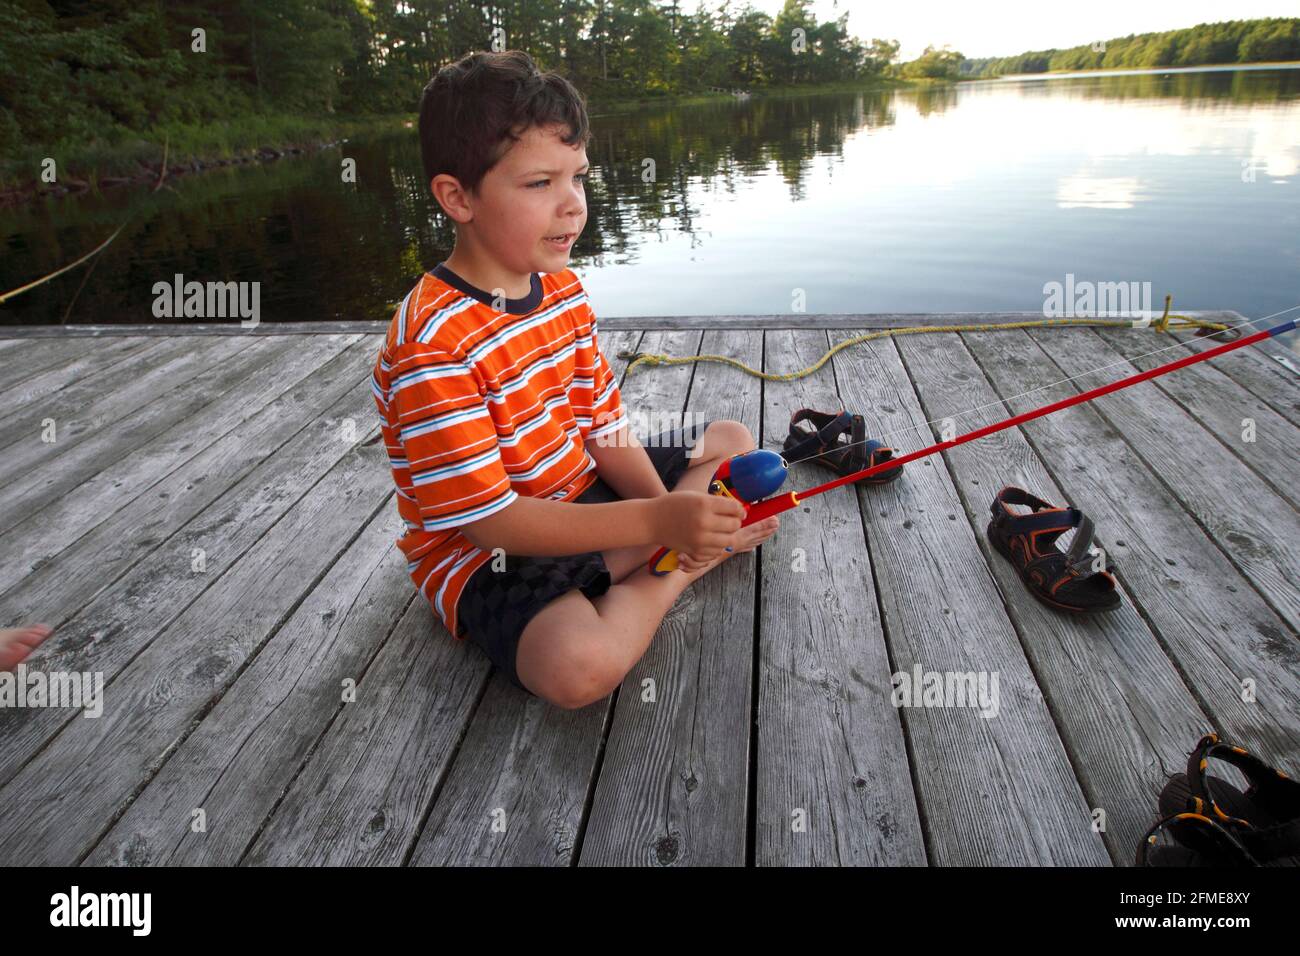 A 7 yr old boy fishing from a wharf Stock Photo